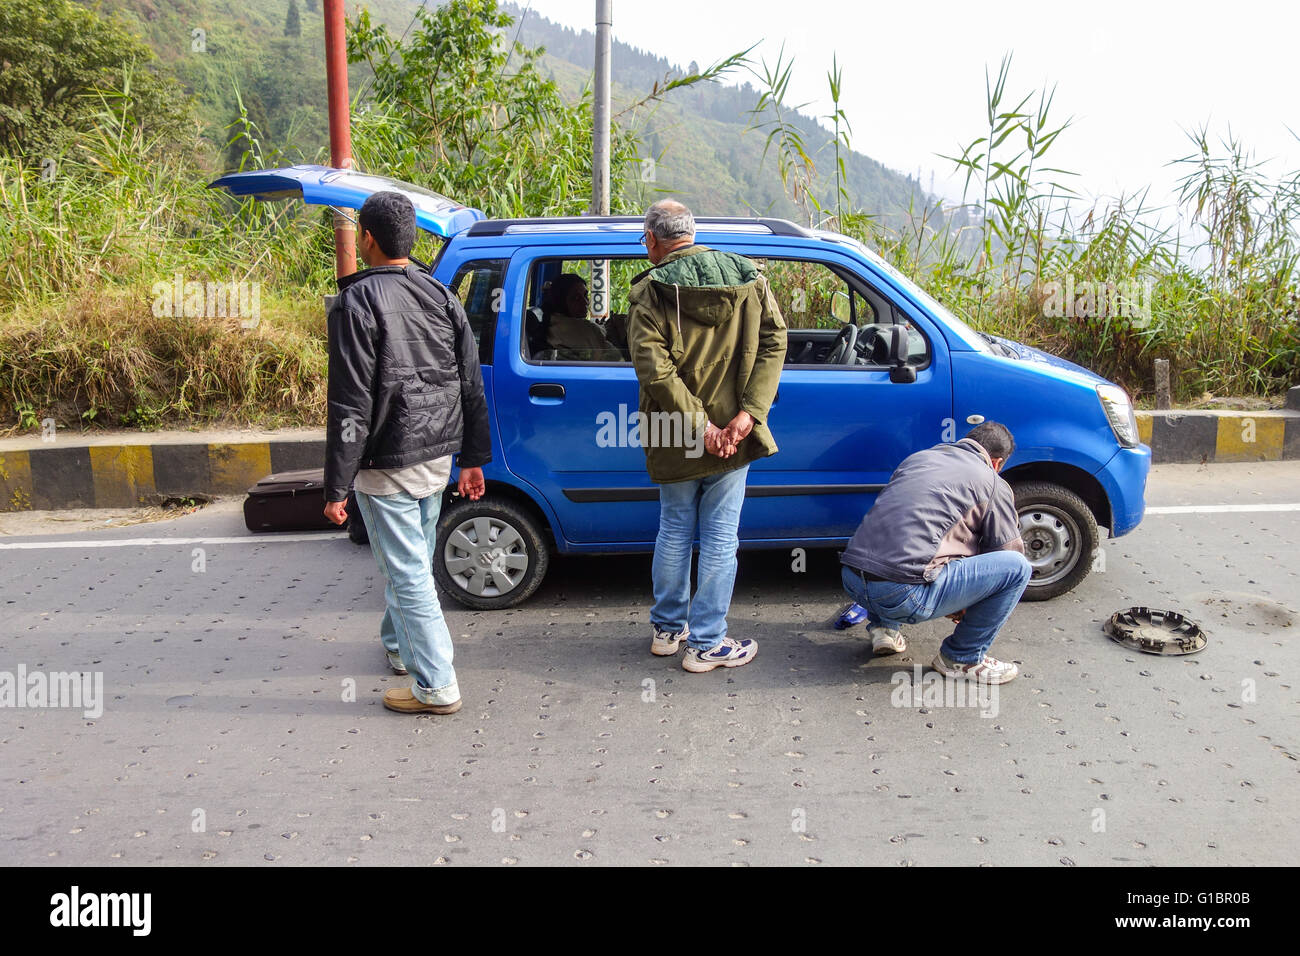 A private taxi owner replaces the punctured tire of his Wagon-R car while the stranded passengers wander on National Highway 55 Stock Photo